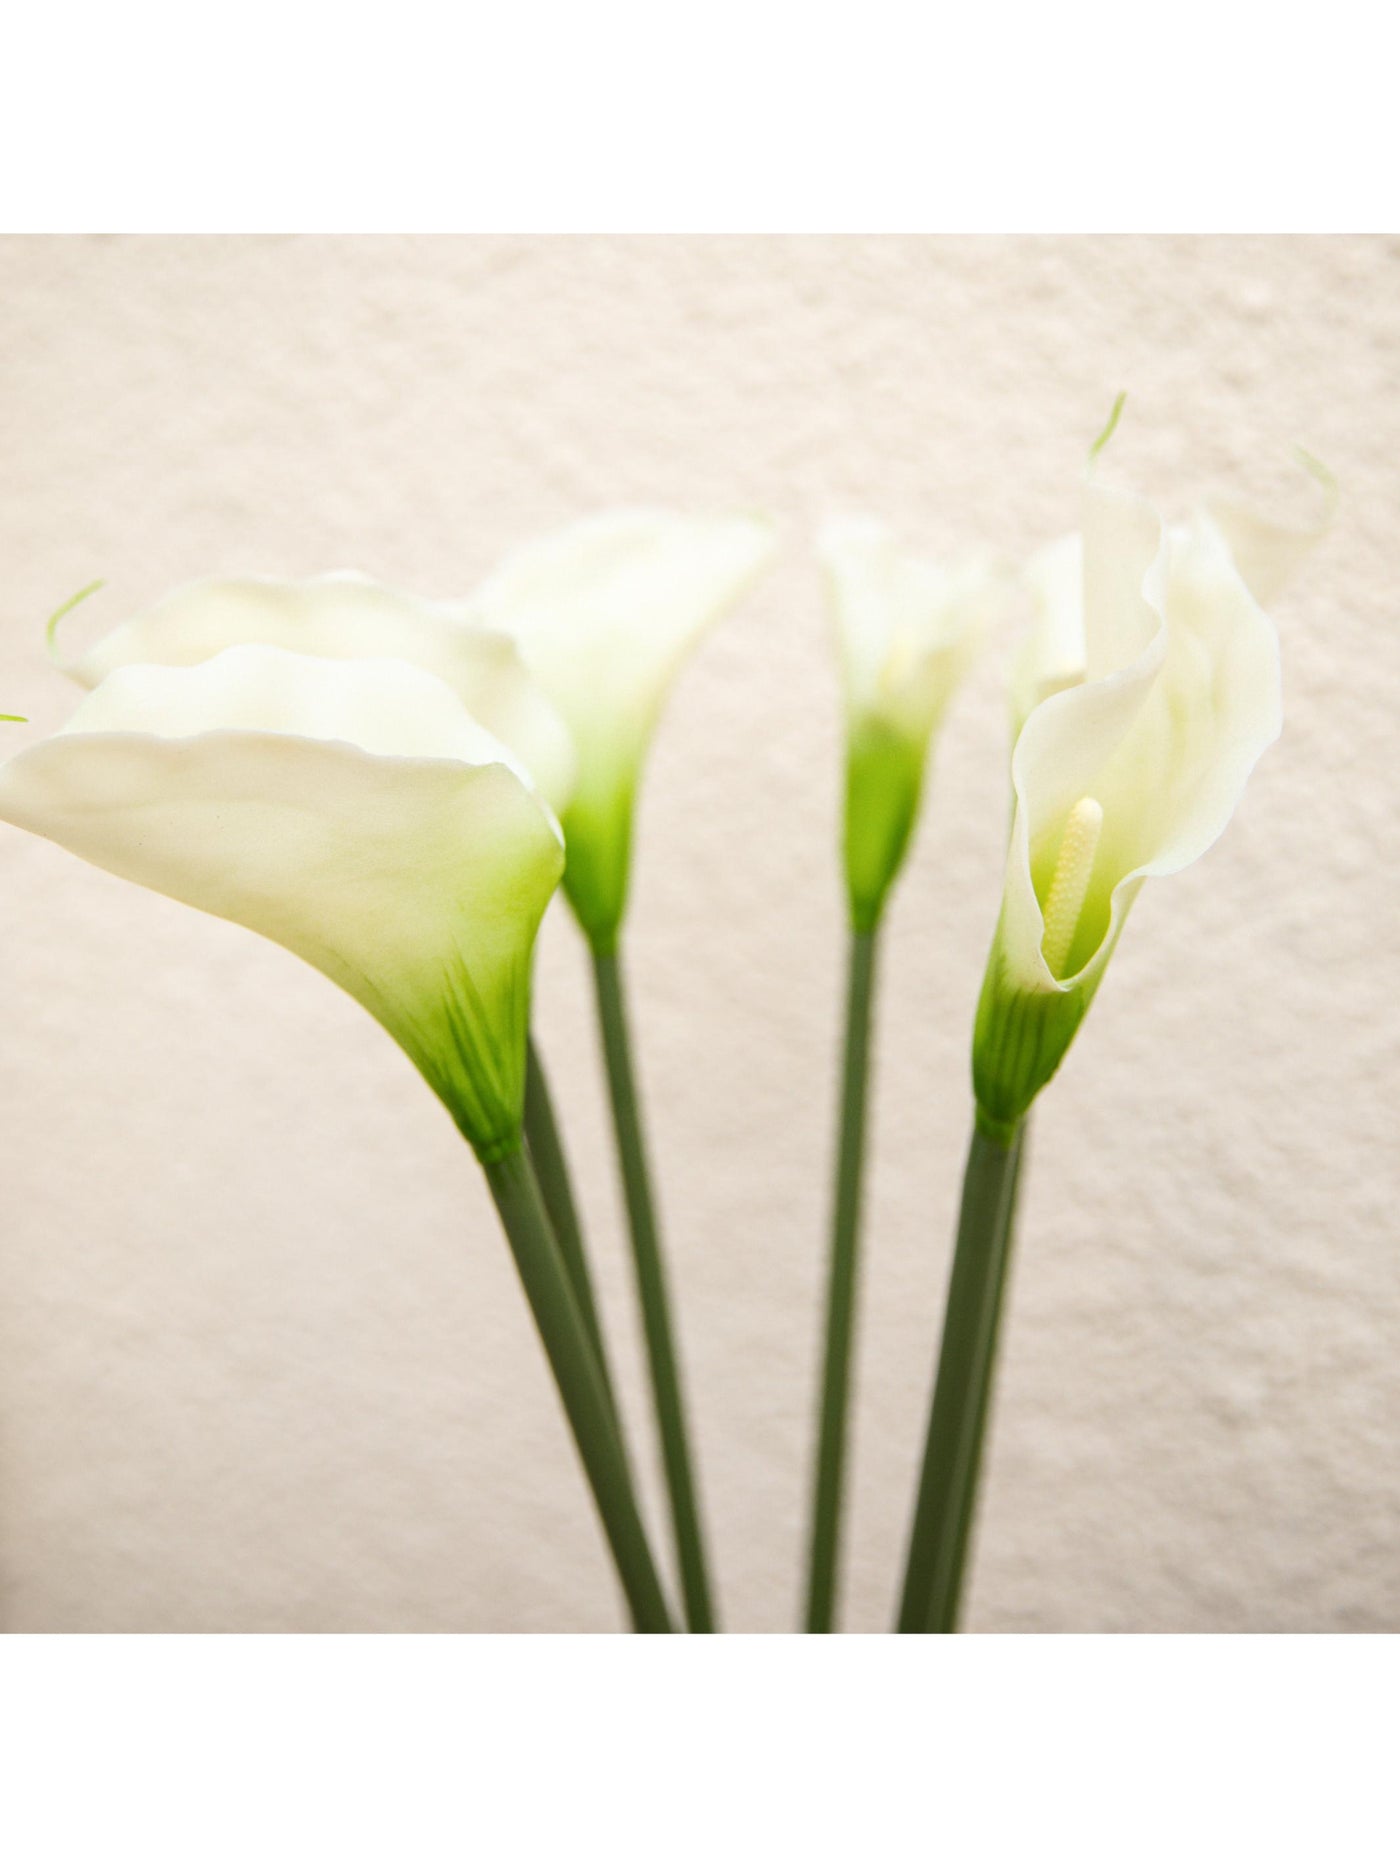 Artificial Flower Cala Lily White